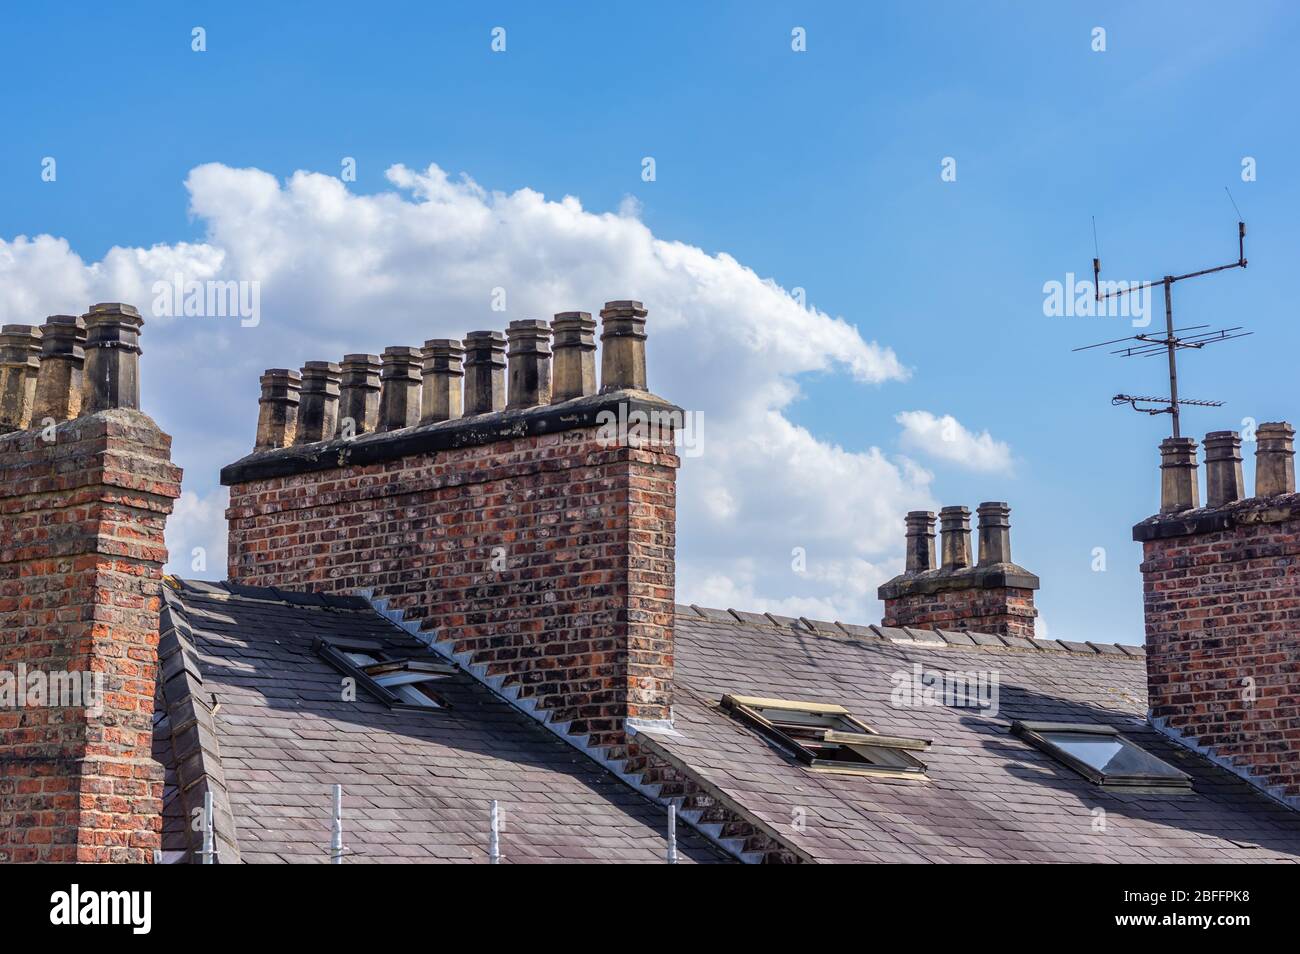 Rows of chimney pots on brick built chimneys on a slate roof with TV arial. Stock Photo